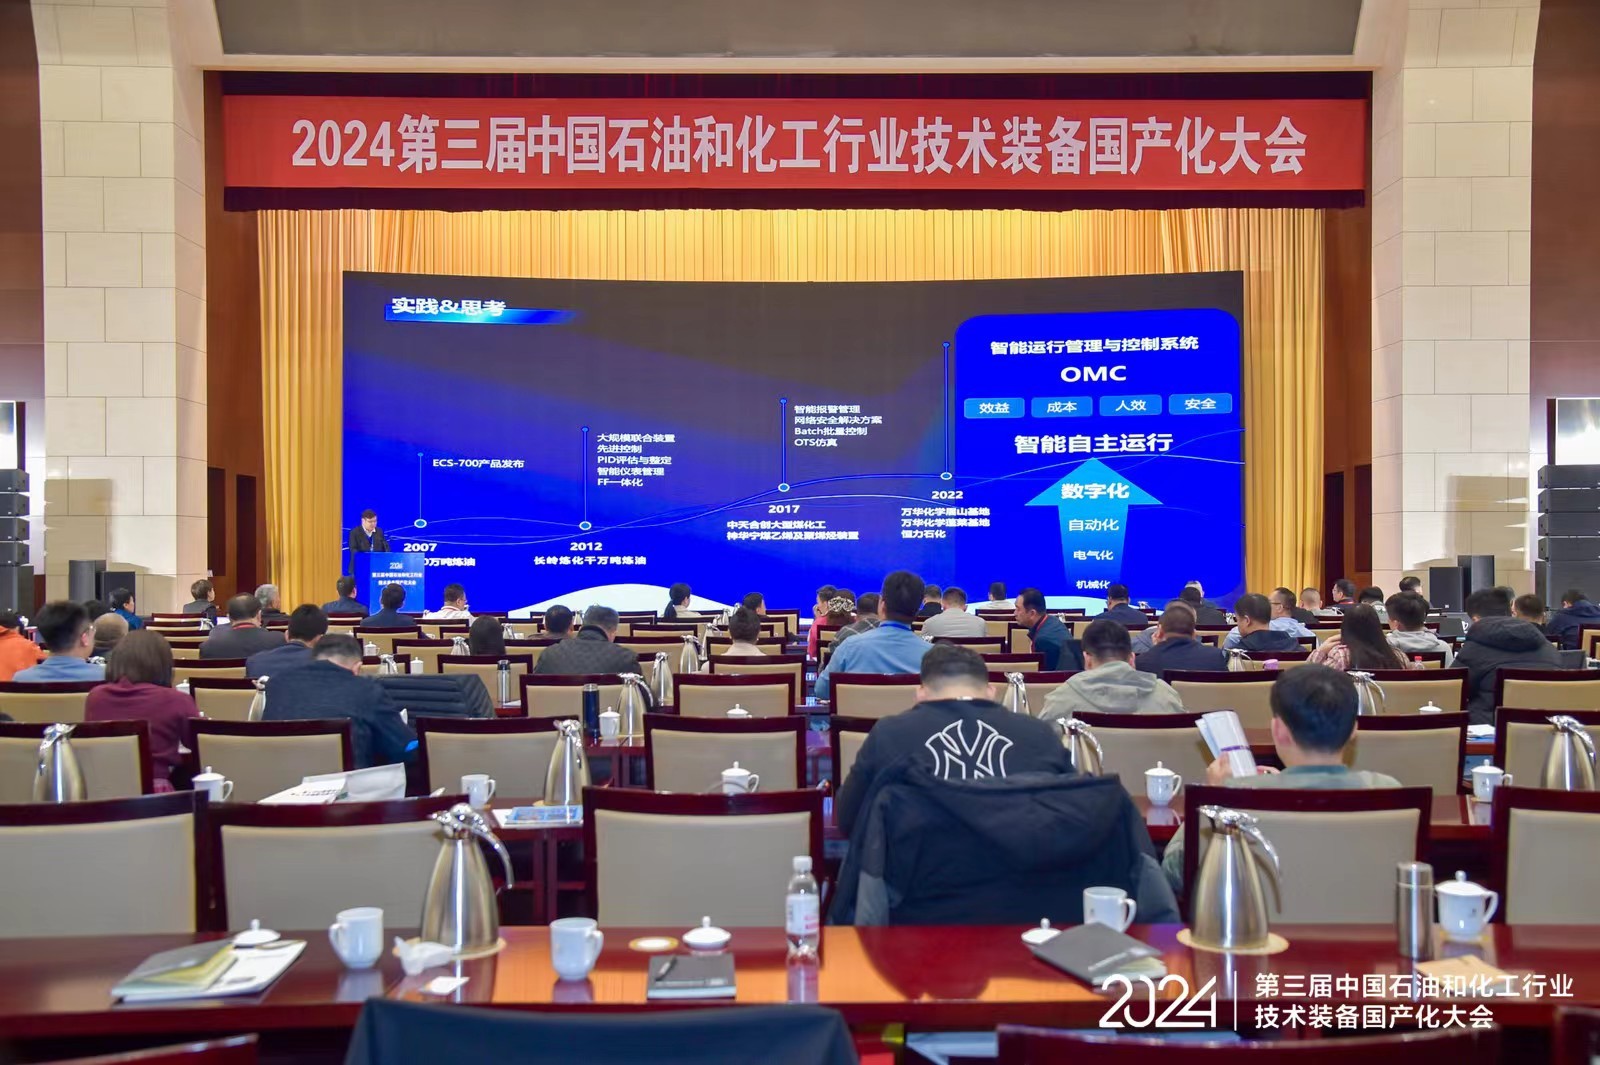 The third China Petroleum and Chemical Industry Technology Equipment Localization Conference in 2024